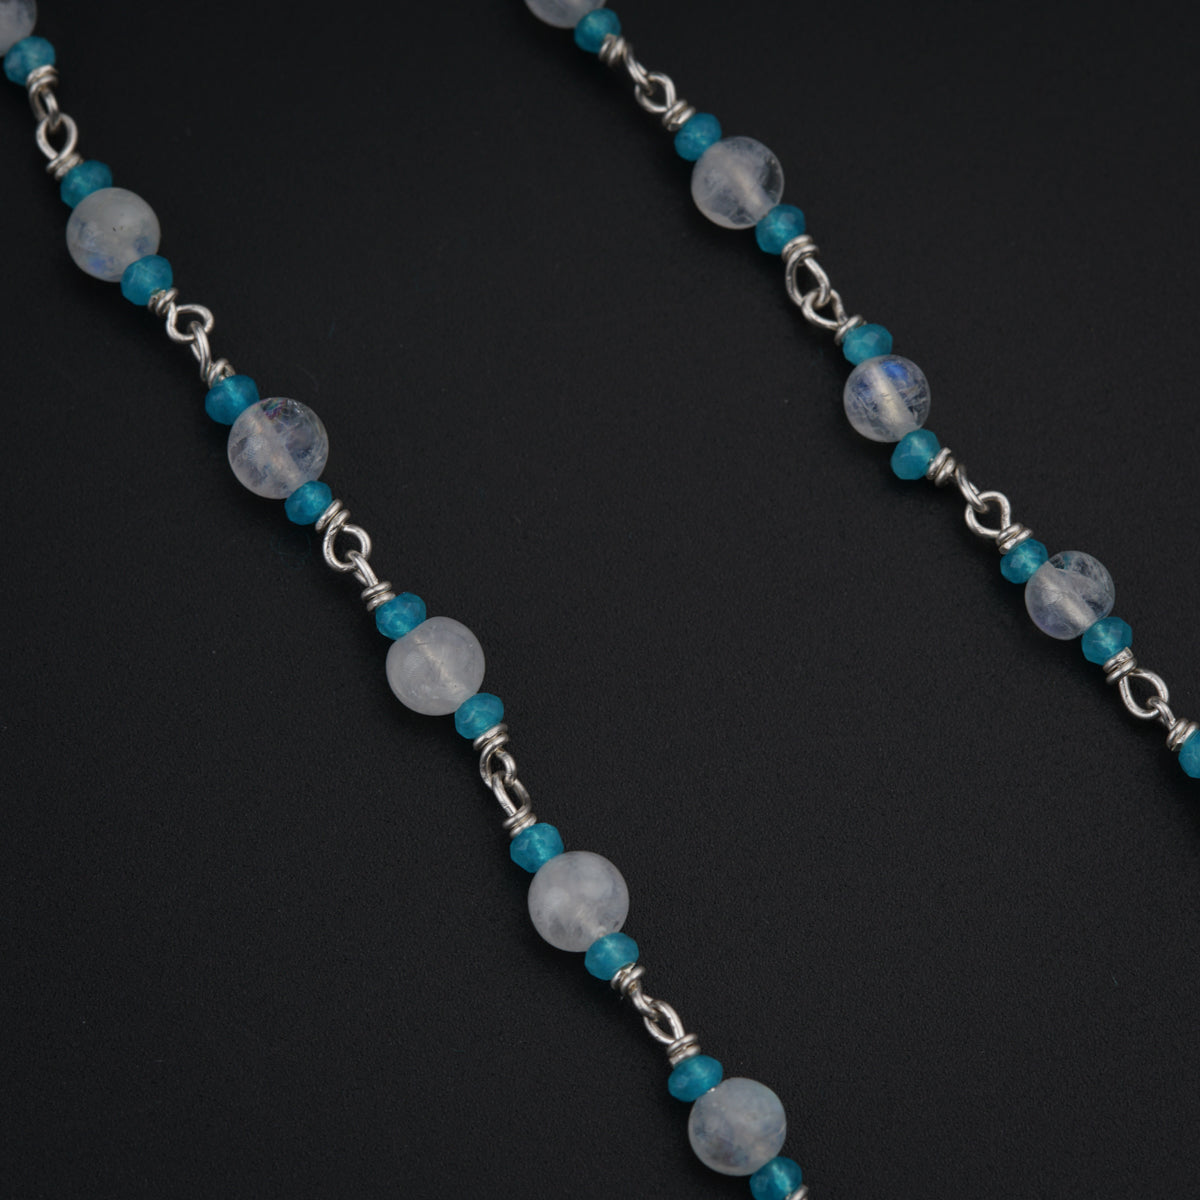 a blue and white beaded necklace on a black background